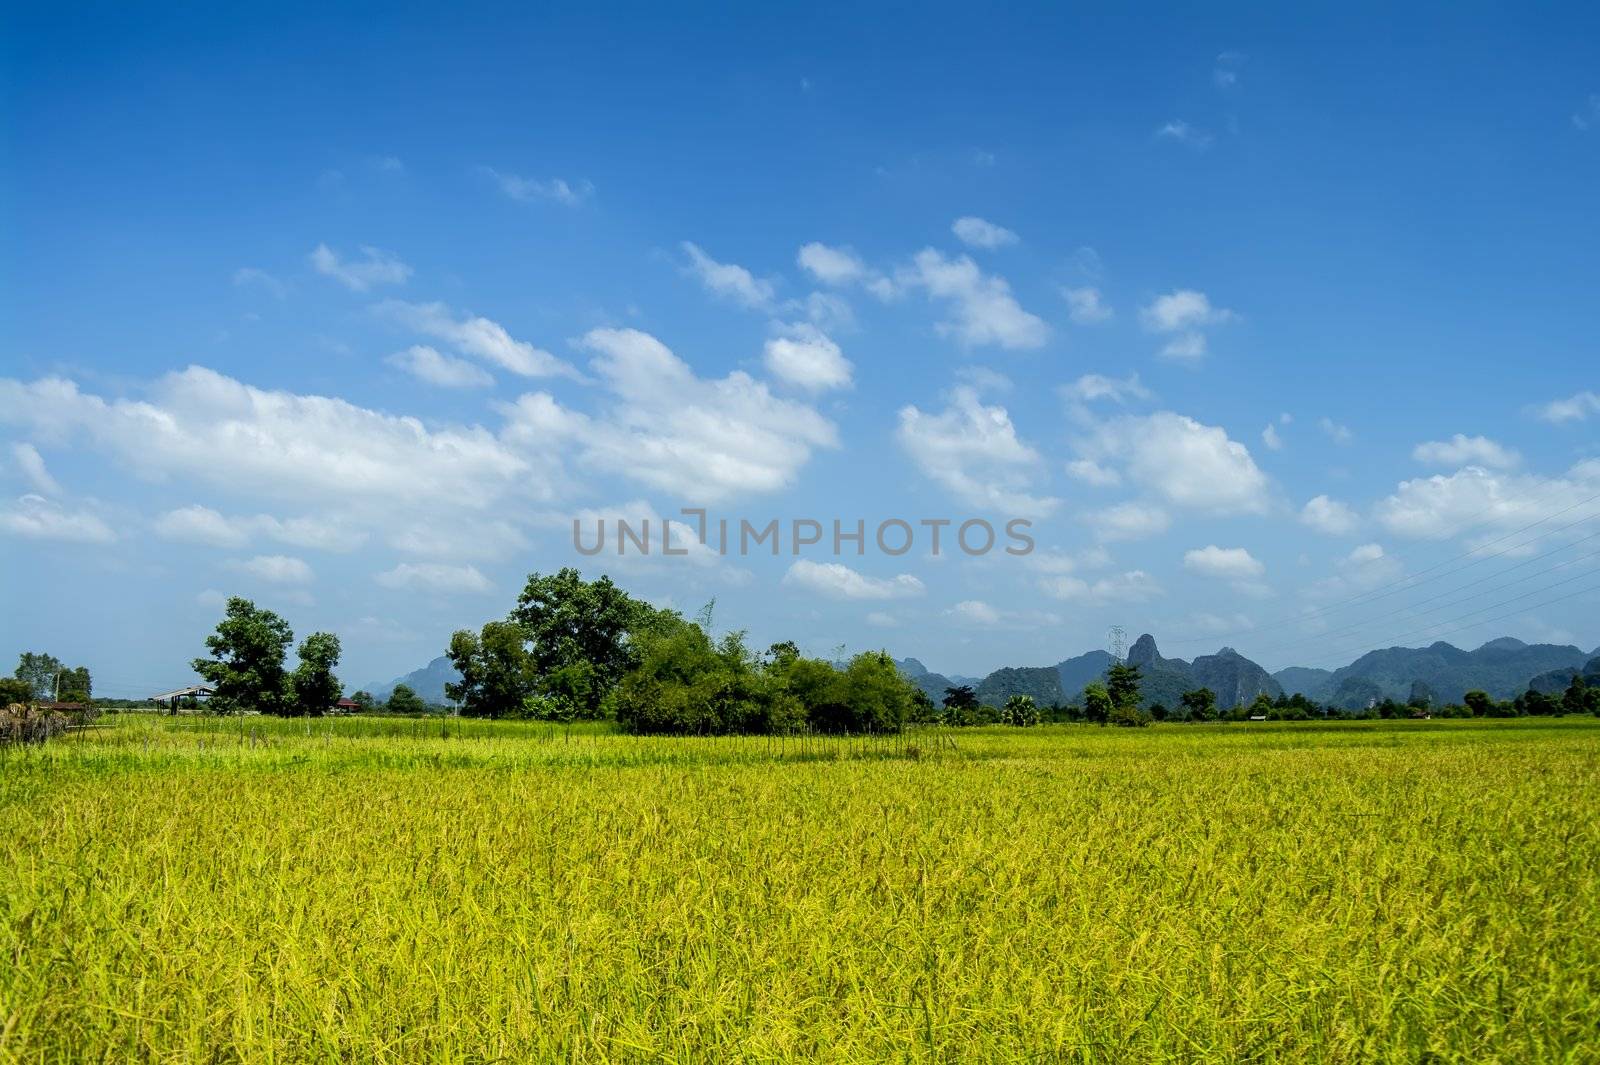 The field is located 8 km northeast of Thakhek near Tham Xang Cave.